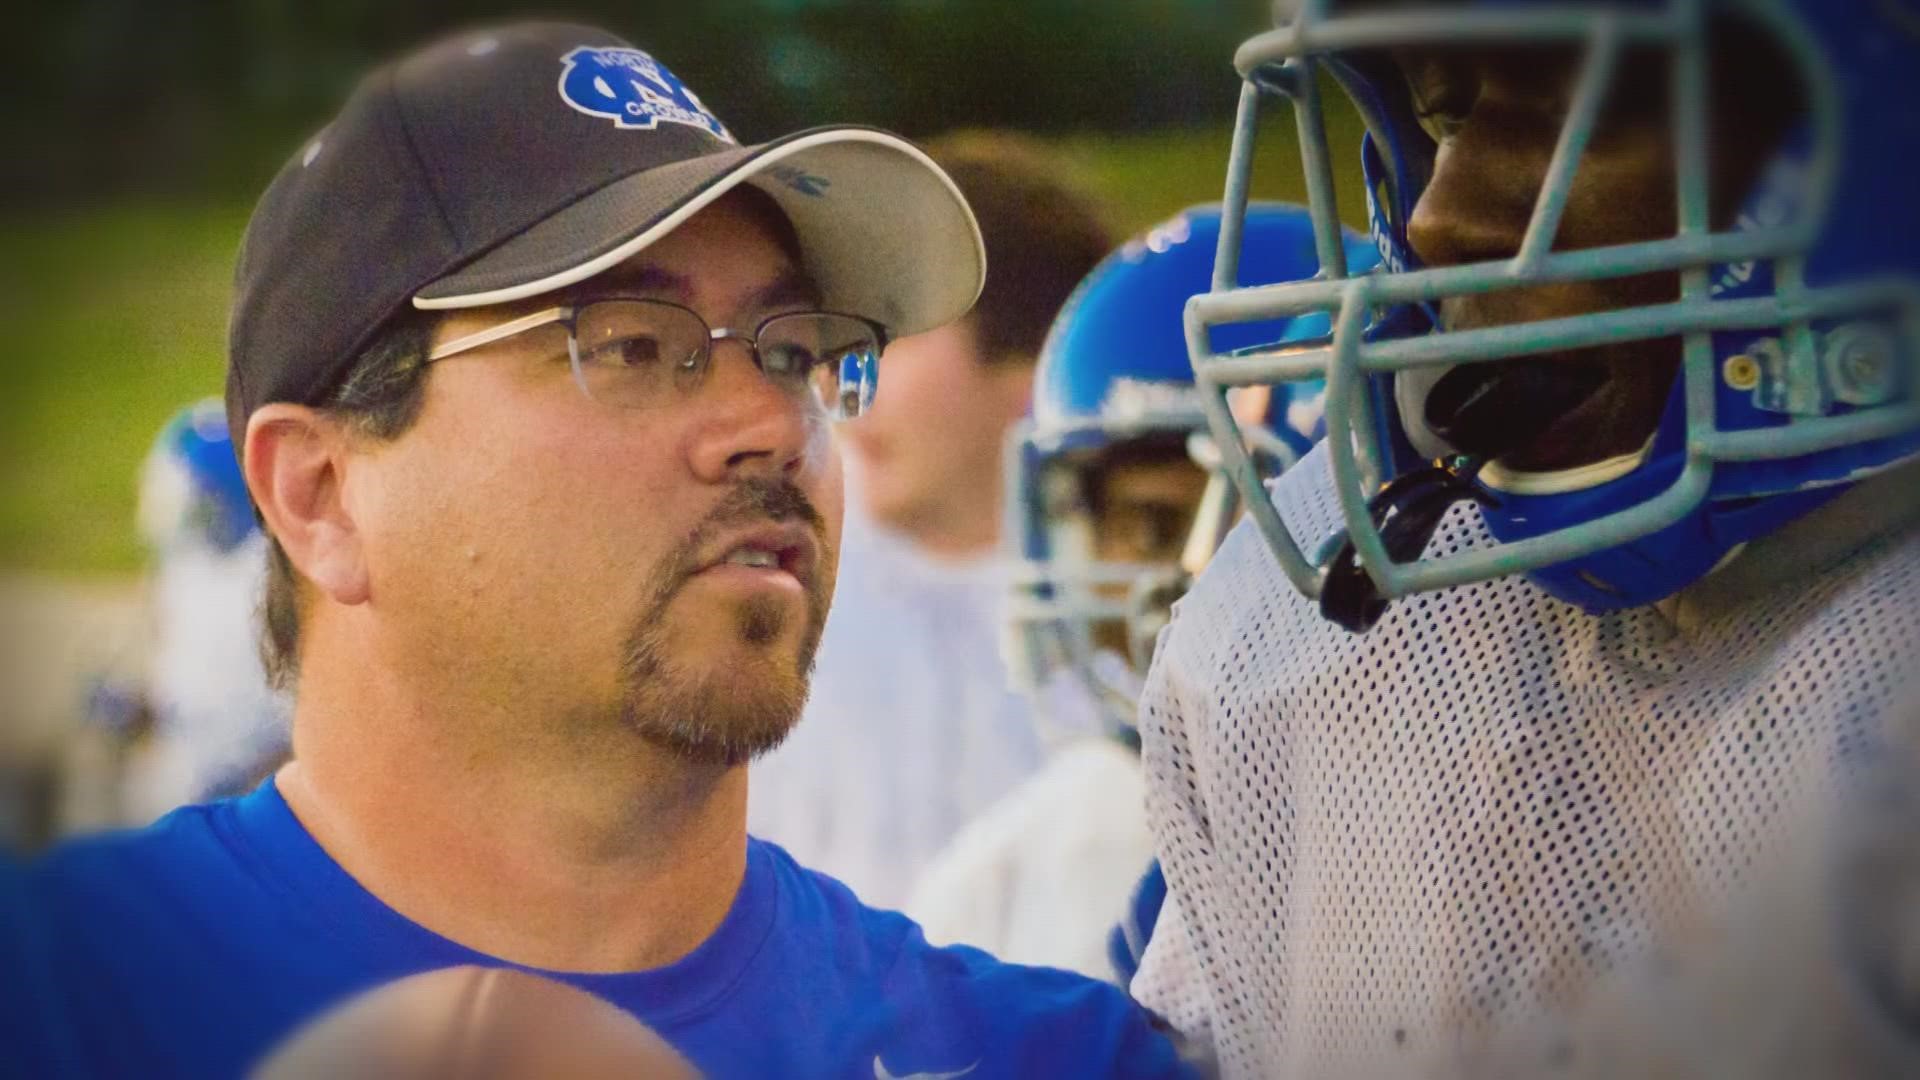 New Allen High School assistant coach dies from COVID-19 